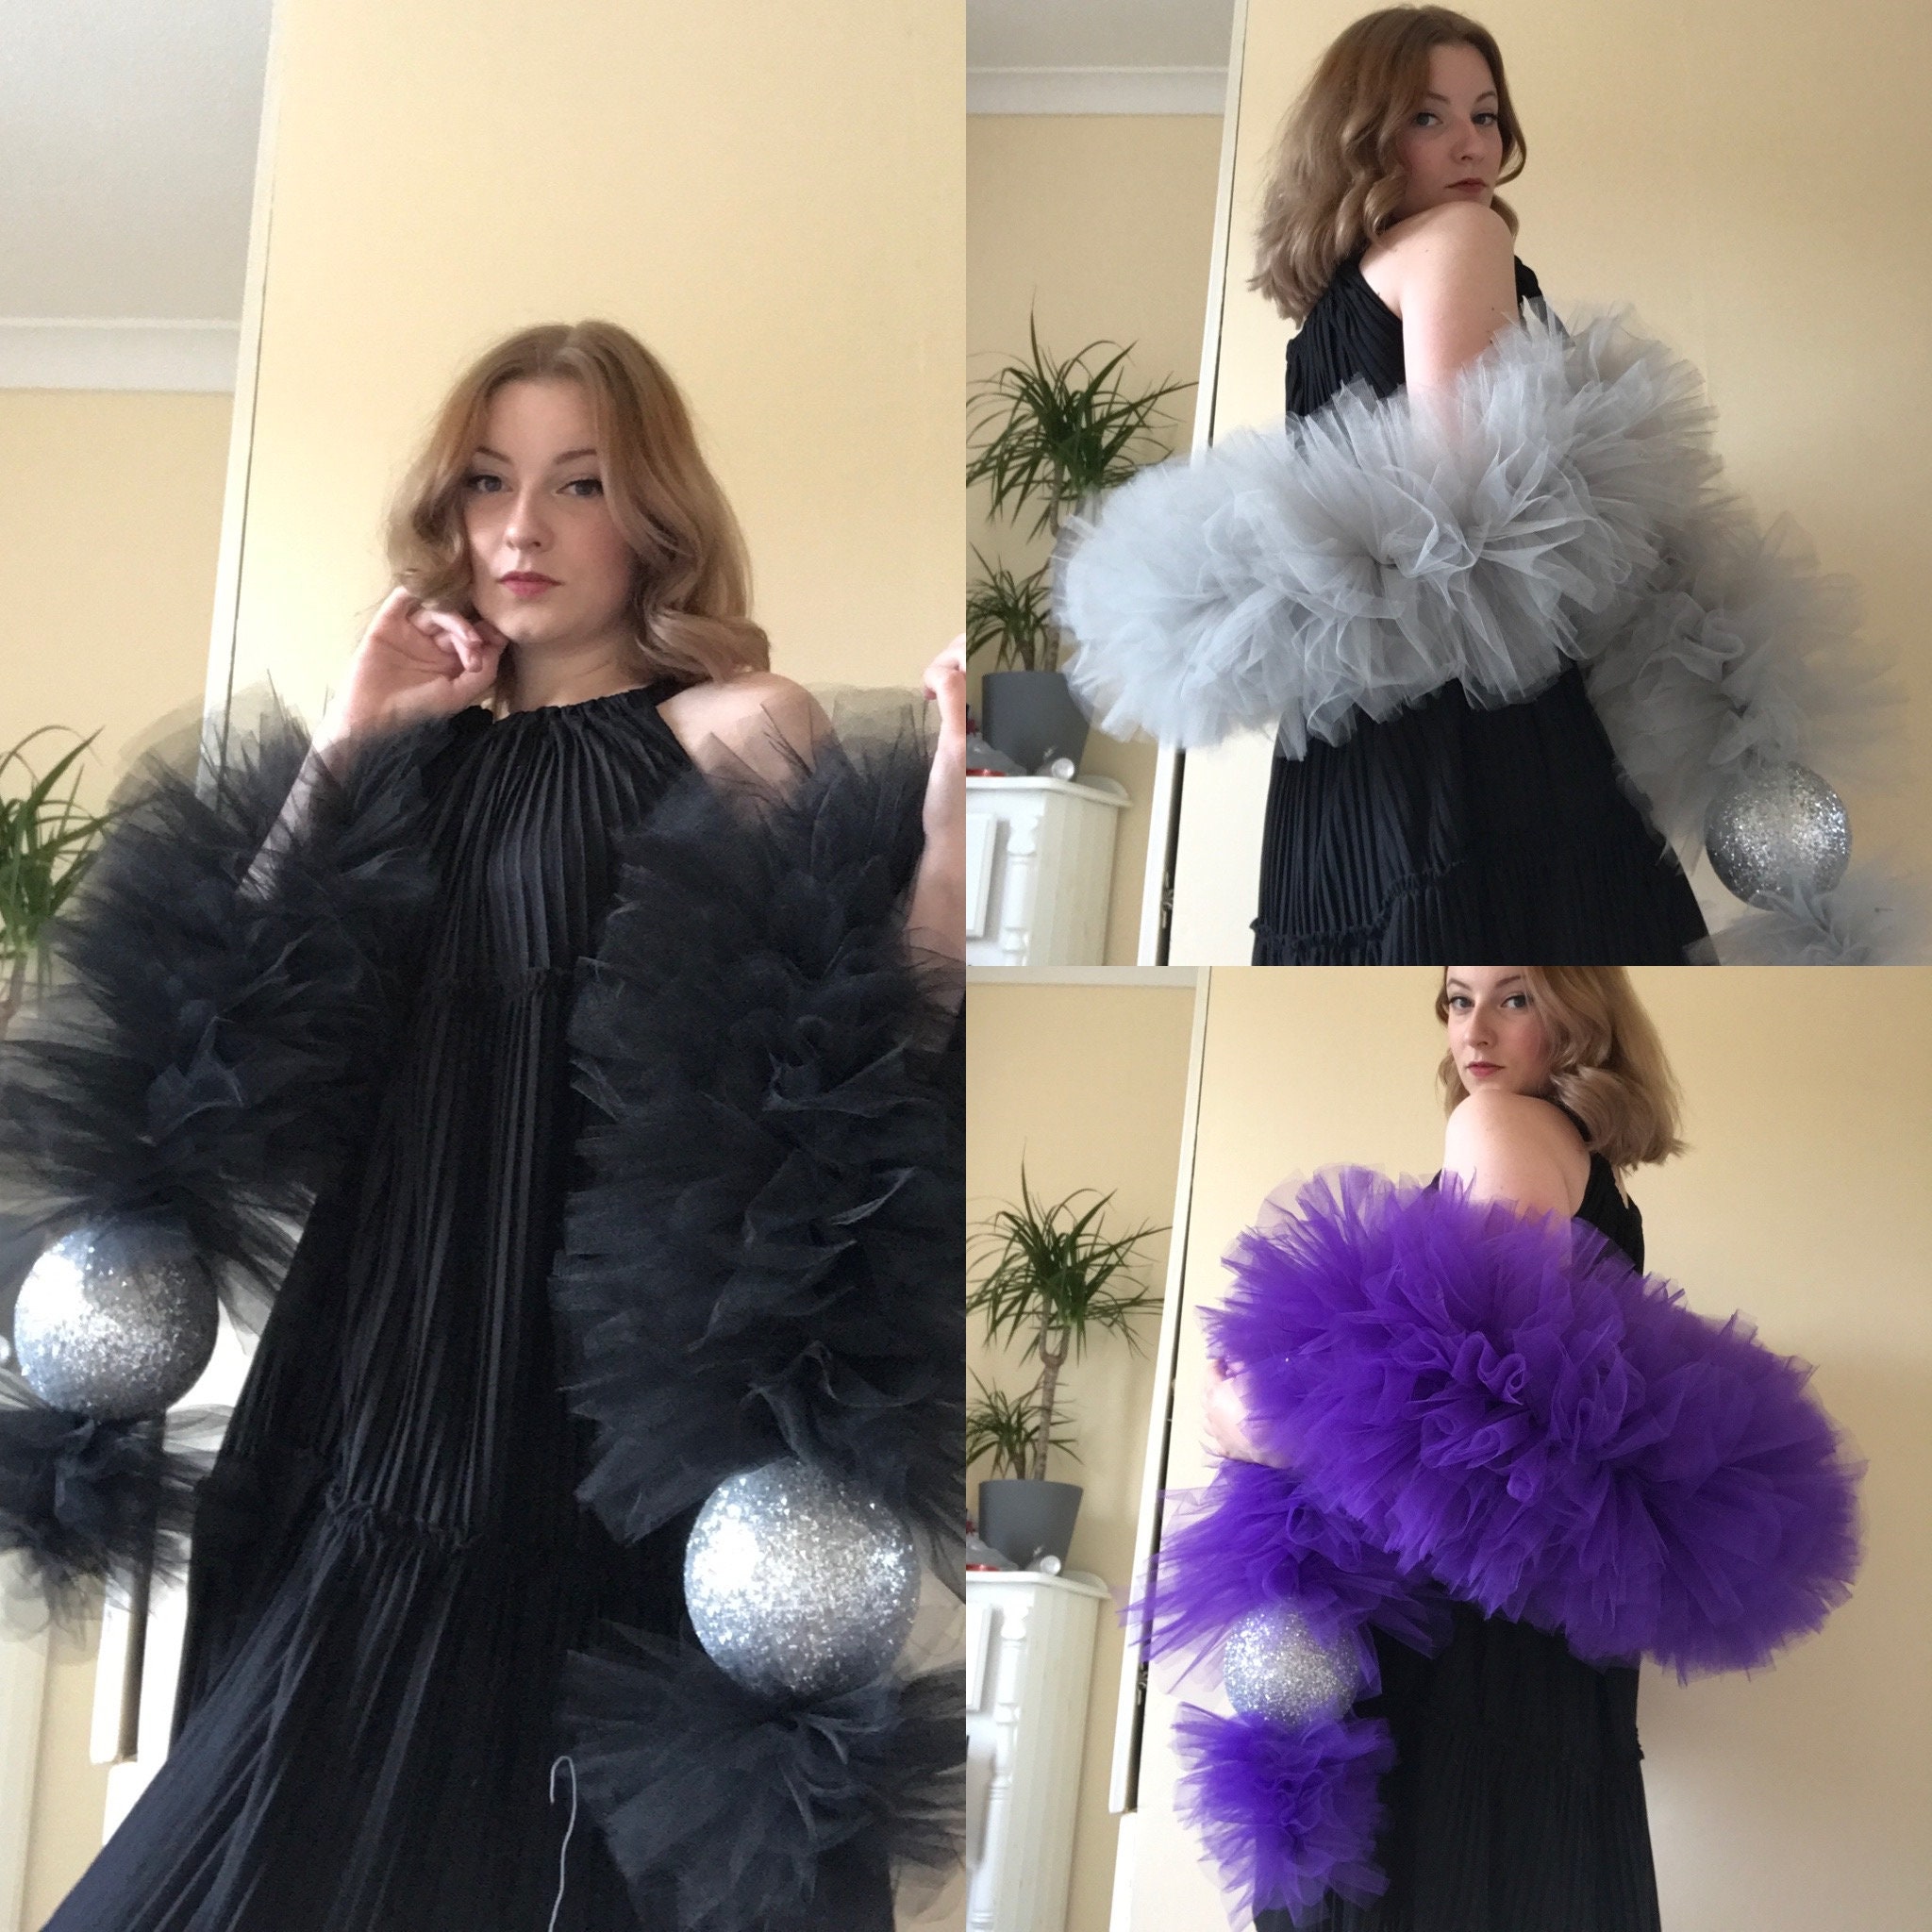 Custom Tulle Faux Feather Boa With Glitter Balls Any Colour Available 